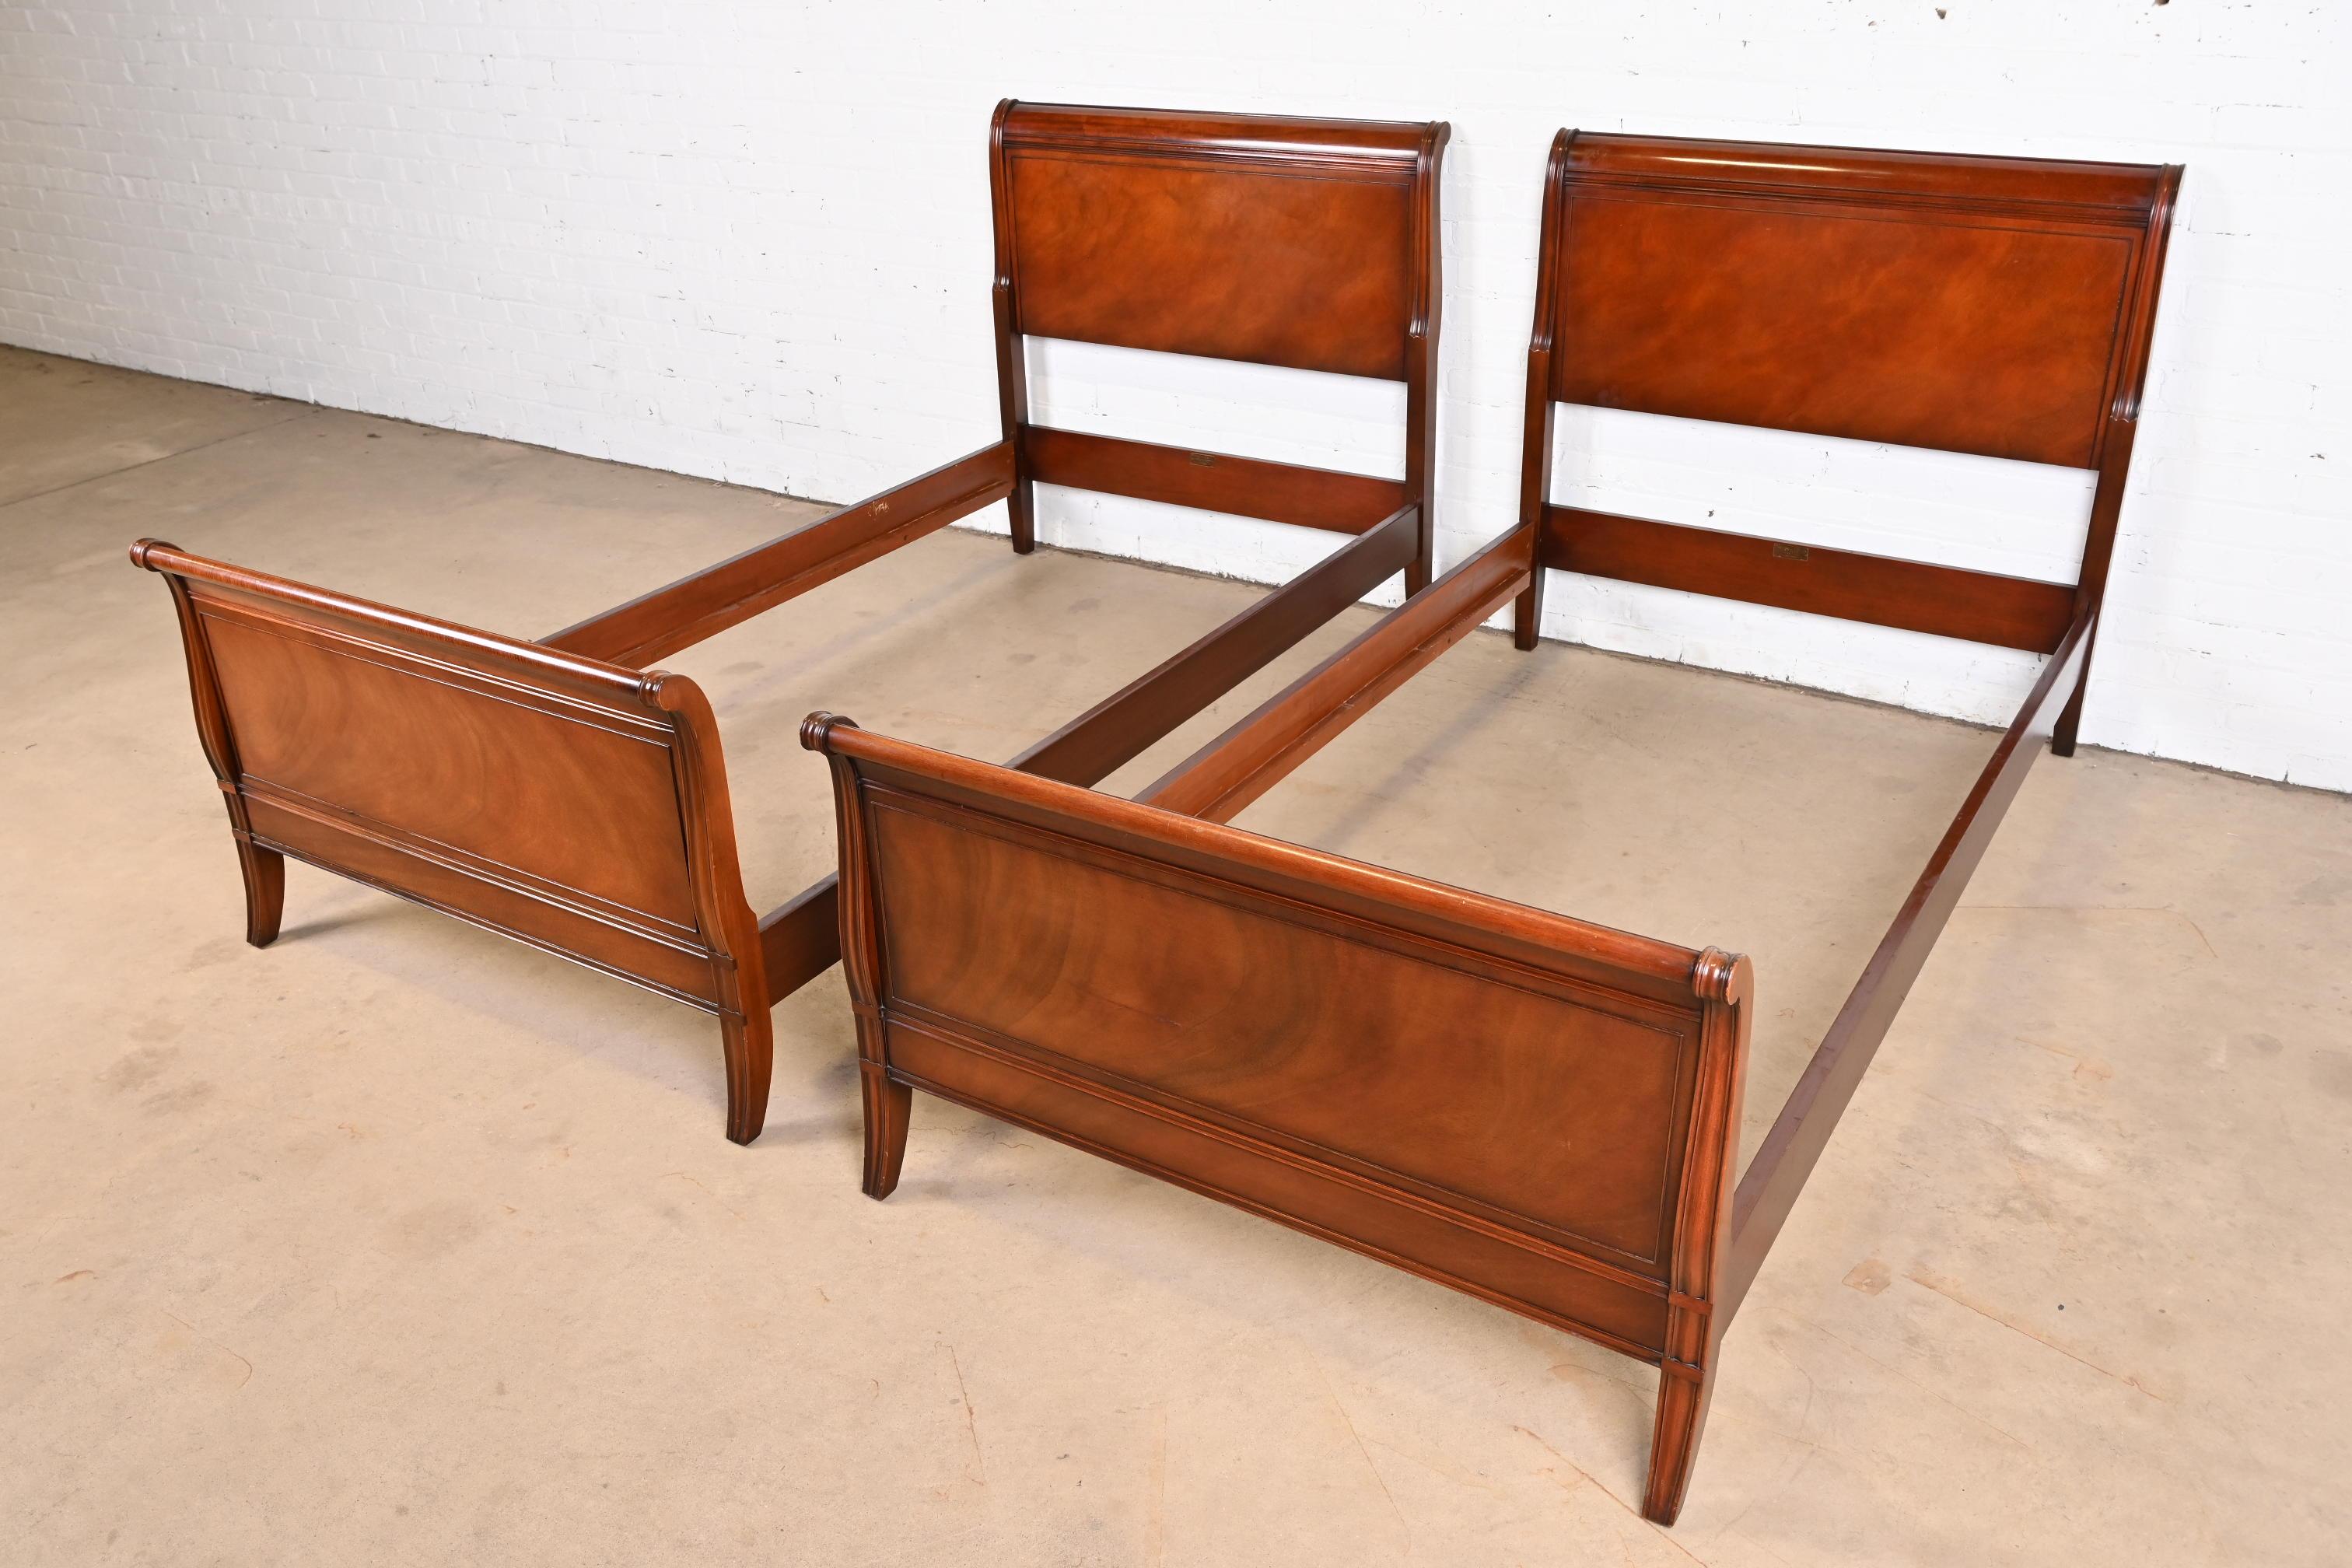 American Regency Carved Mahogany Twin Size Sleigh Beds by Fallon & Hellen, circa 1930s